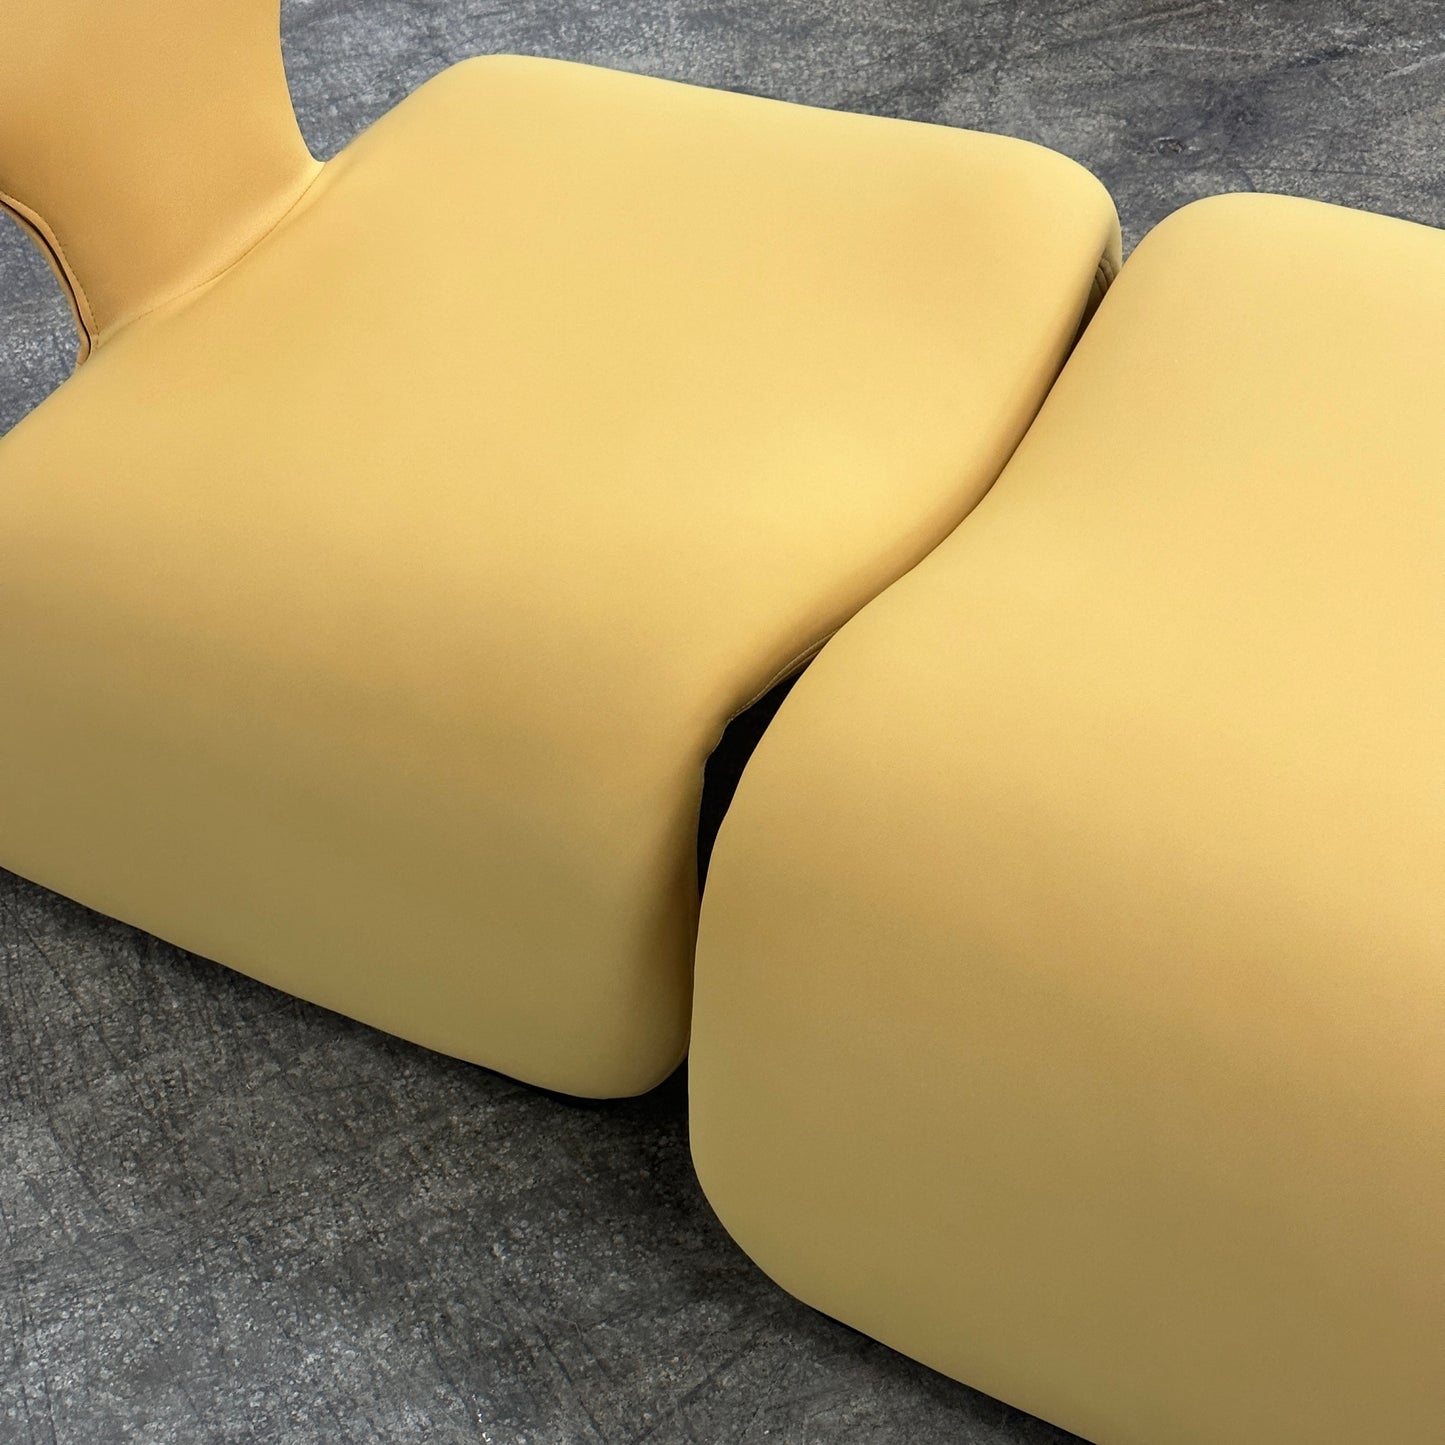 Djinn Chair + Ottoman by Olivier Mourgue for Airborne